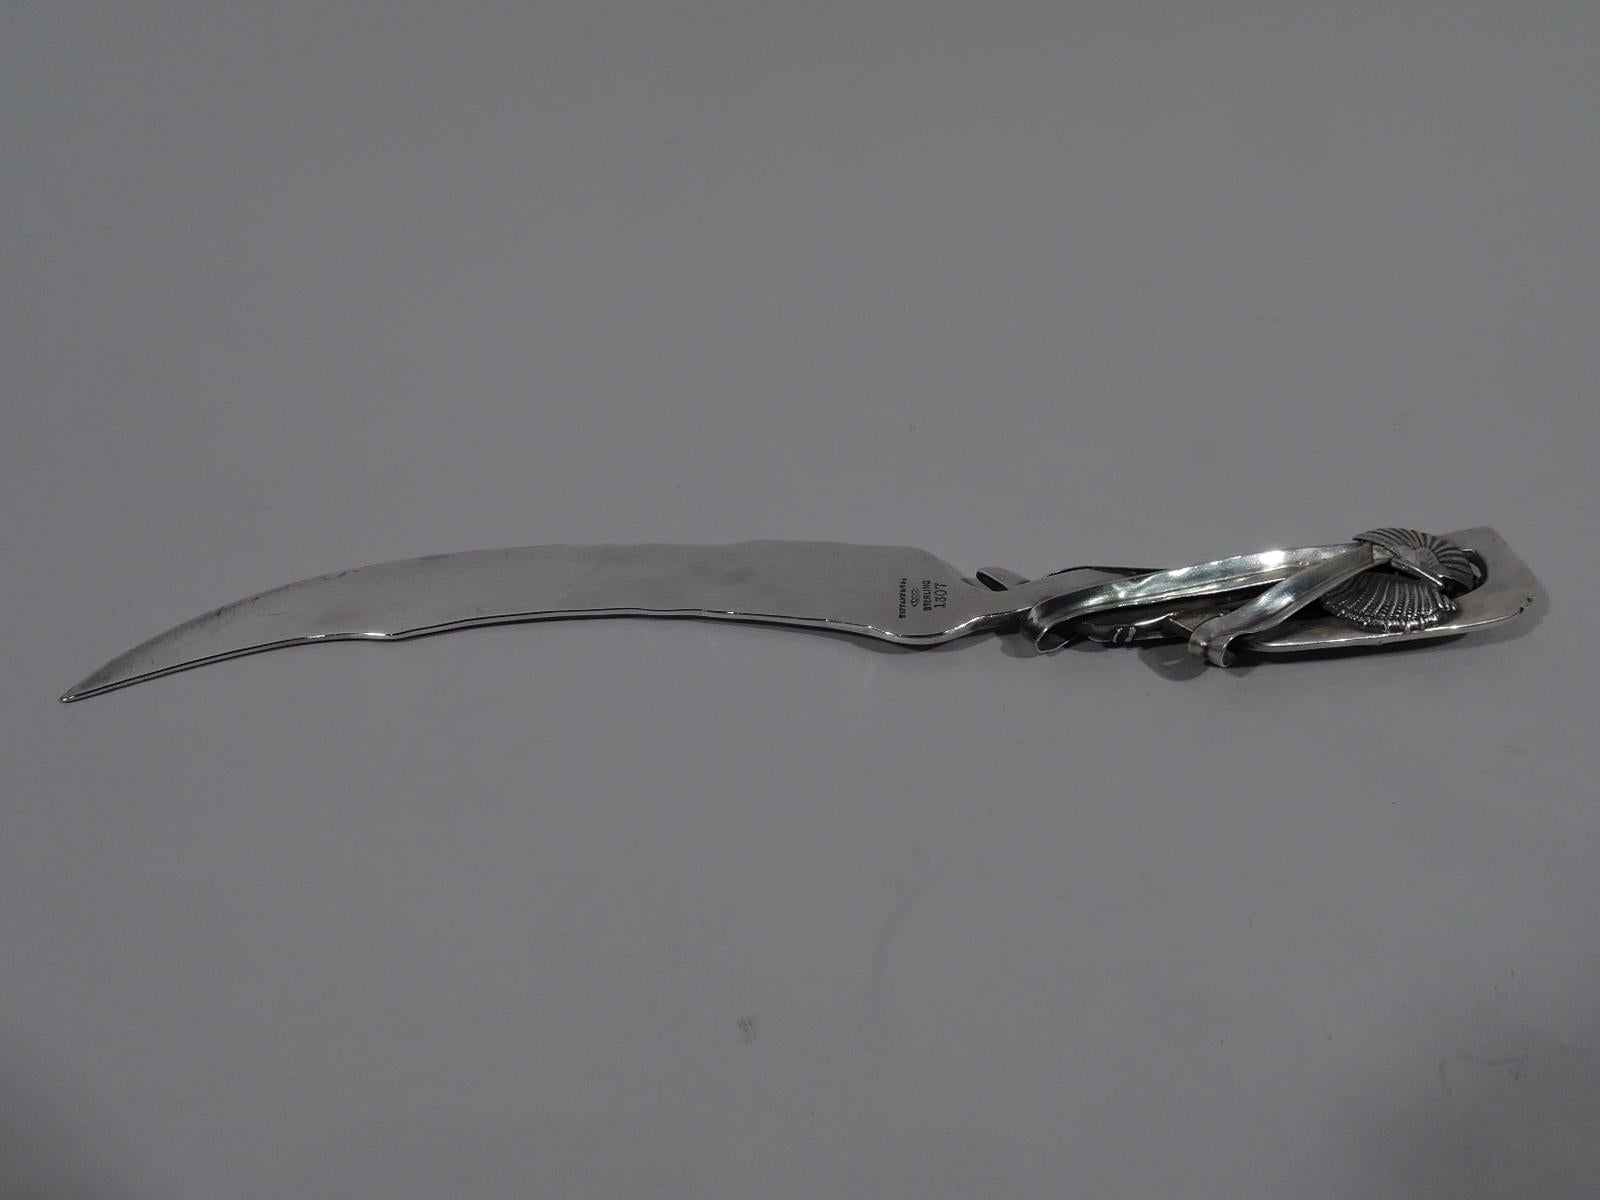 Market-fresh Japonesque sterling silver paper knife. Made by Shiebler for Tiffany & Co. in New York, circa 1890. Samurai-sword scythe blade and double-sided open handle entwined with grass and encrusted with seashells and crab. Blade hand-hammered